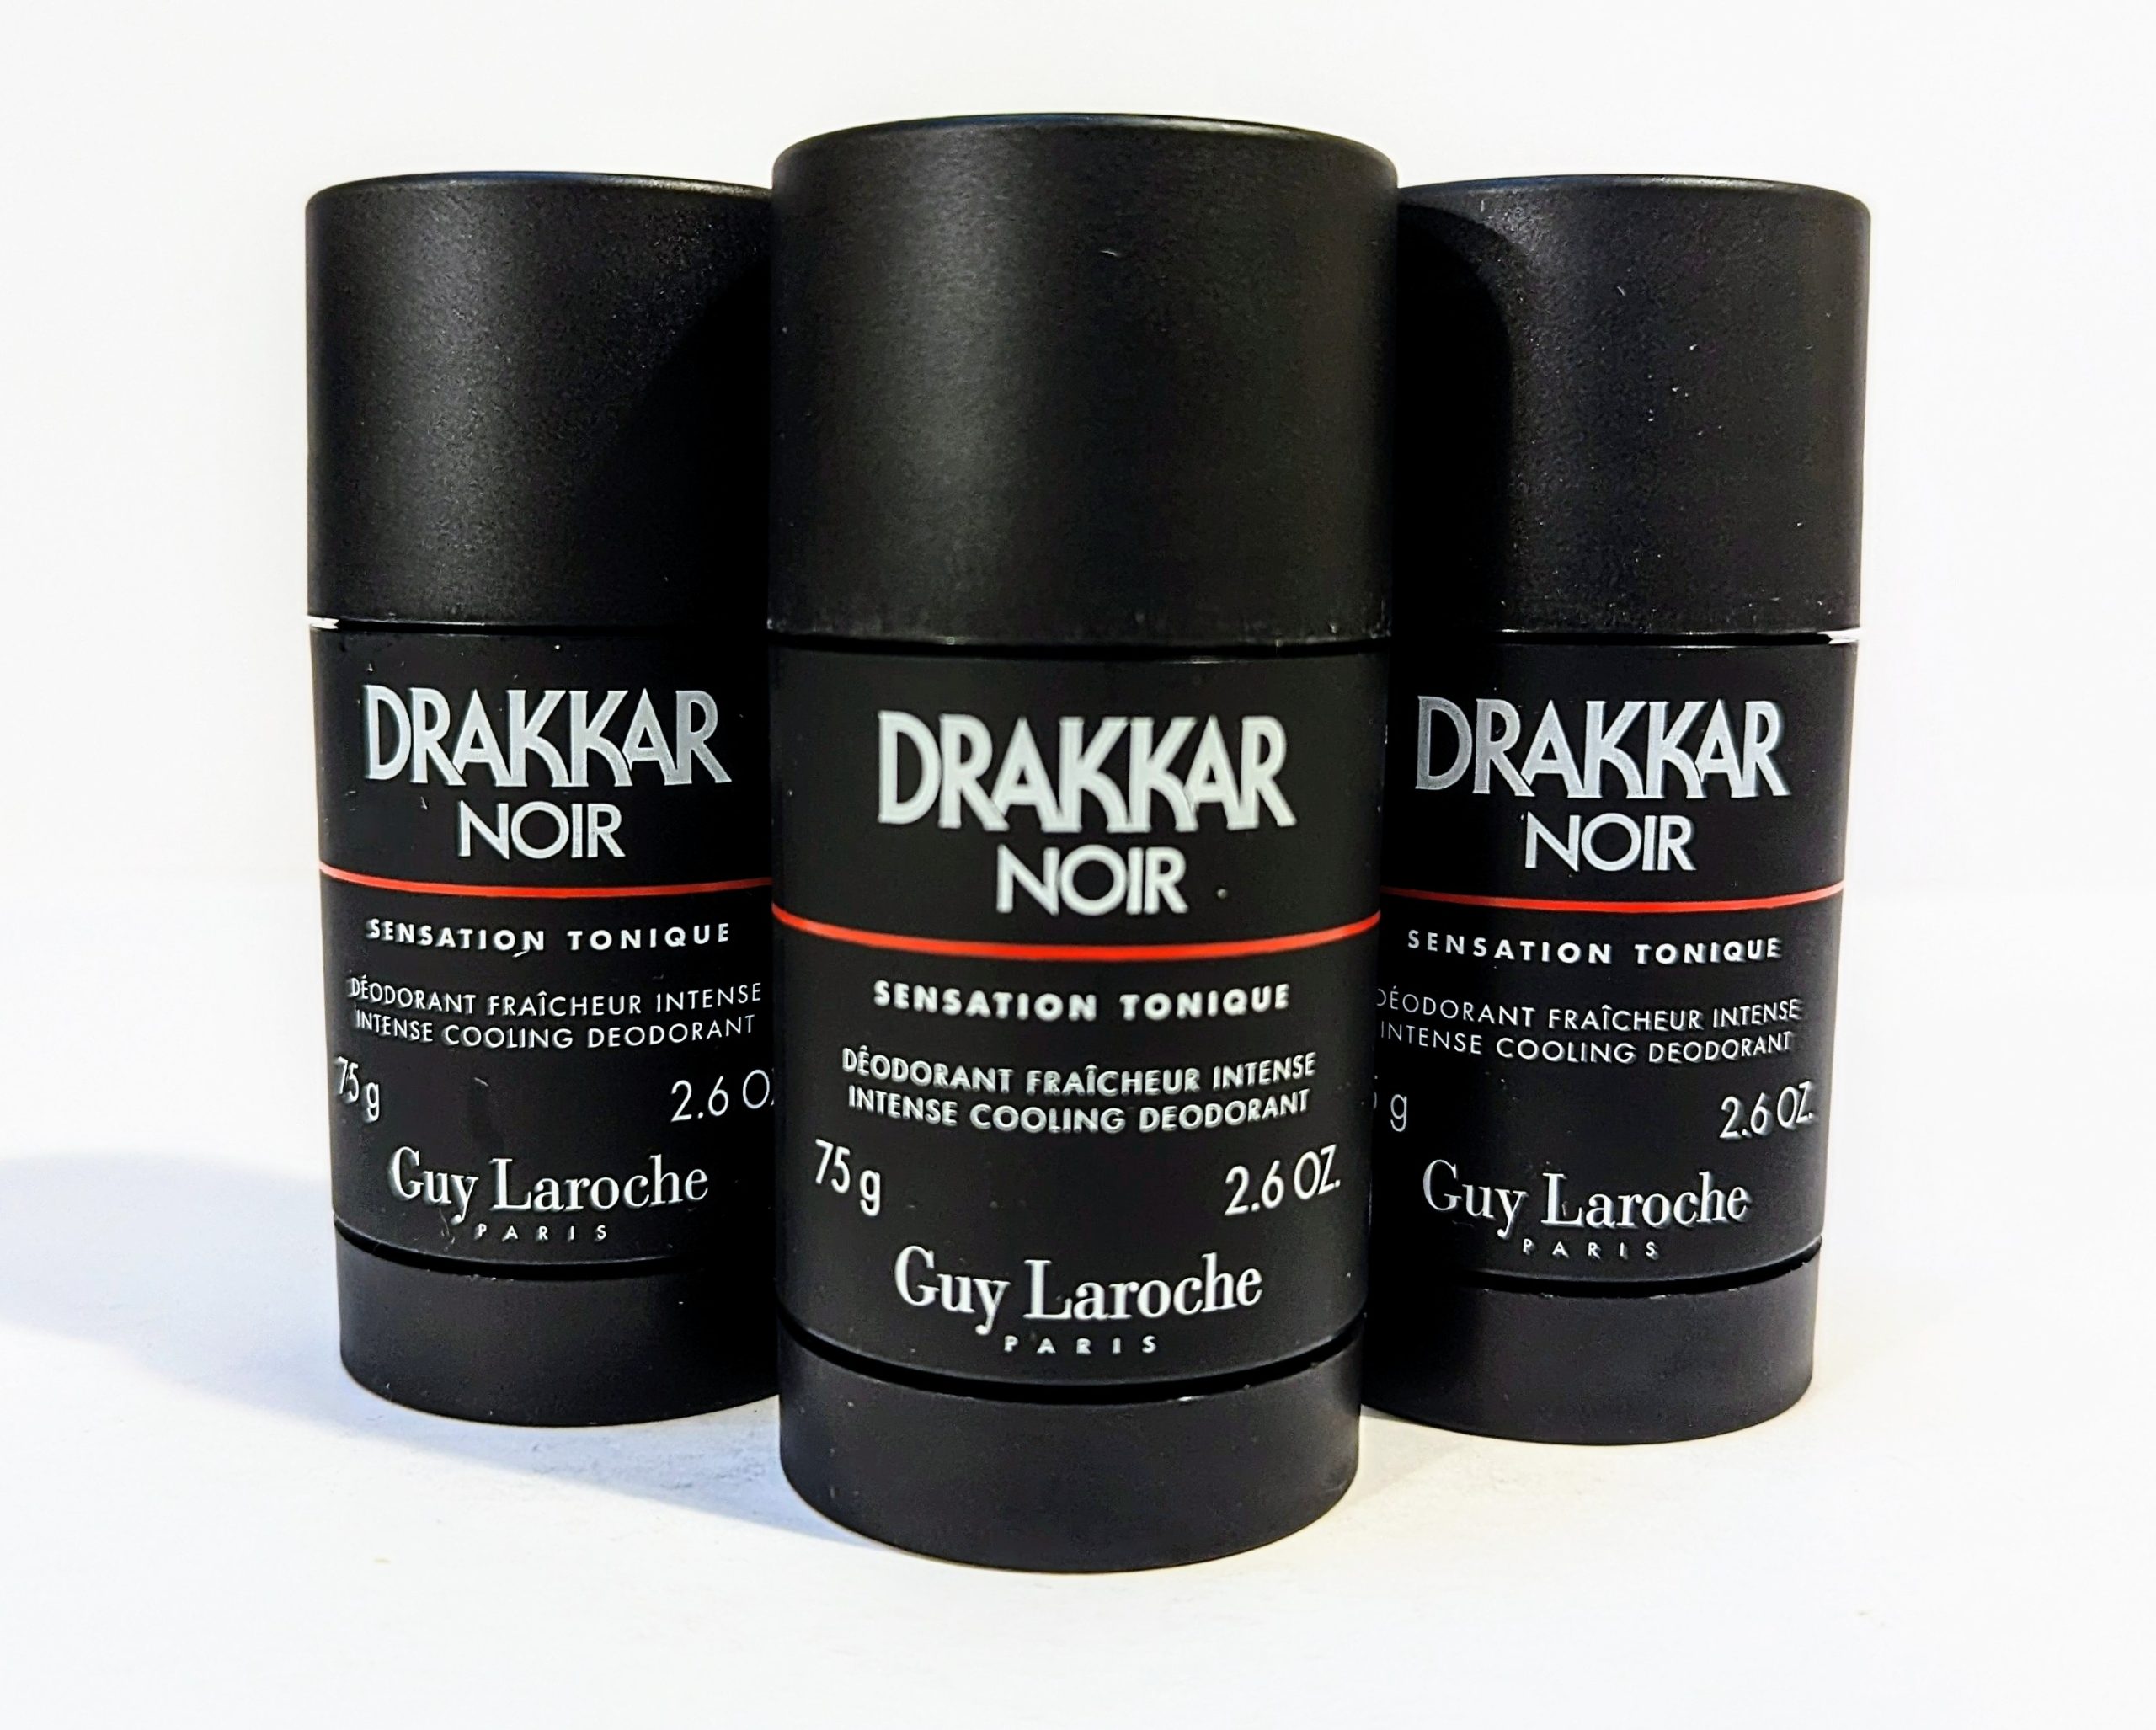 Three black cylindrical deodorant sticks labeled “Drakkar Noir” by Guy Laroche, each with a net weight of 2.6 oz (75 g). They are arranged side by side on a white surface.